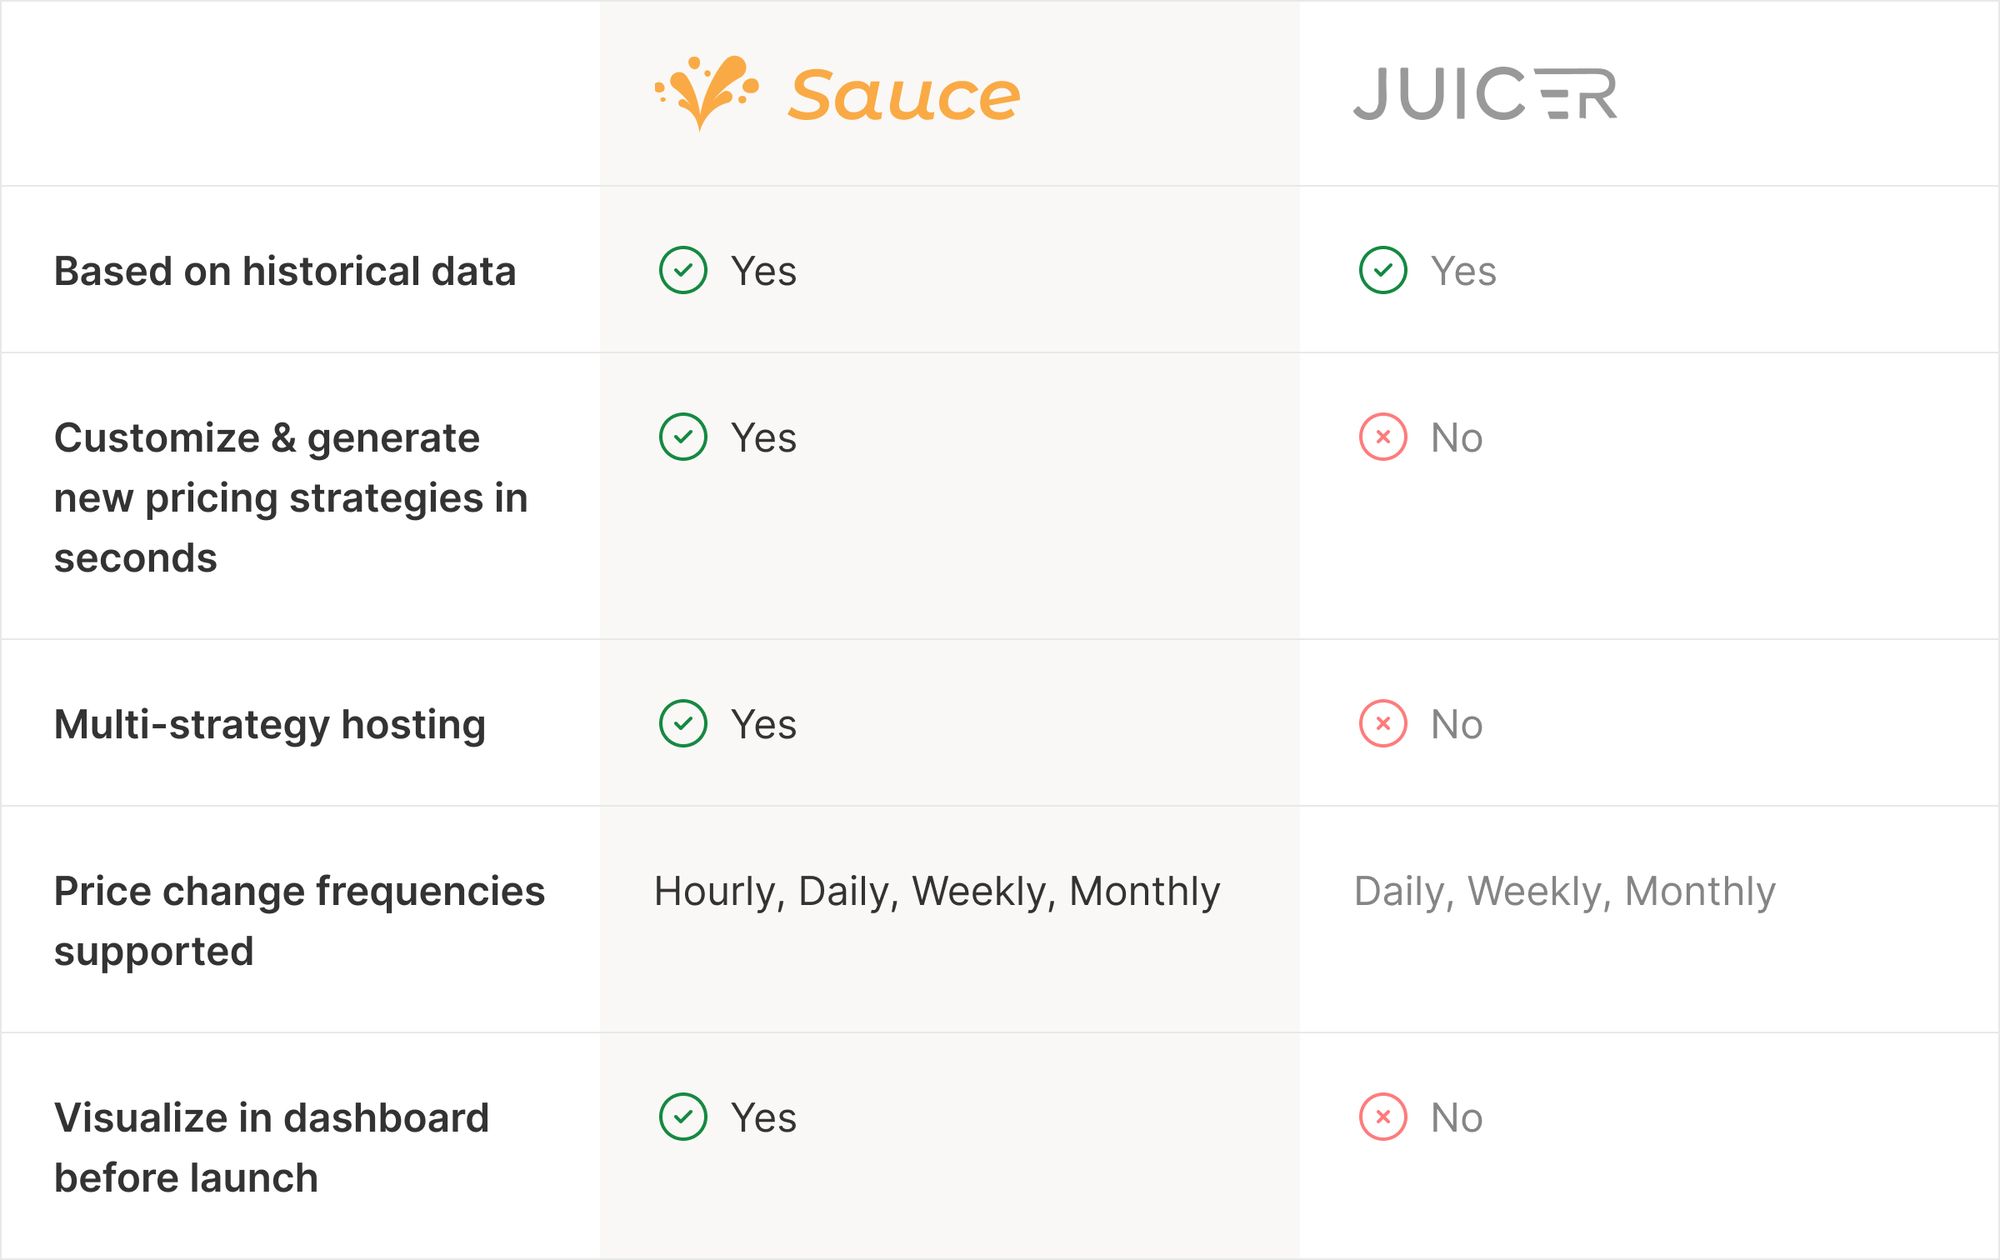 Sauce vs. Juicer: The Key Differences on ItsaCheckmate